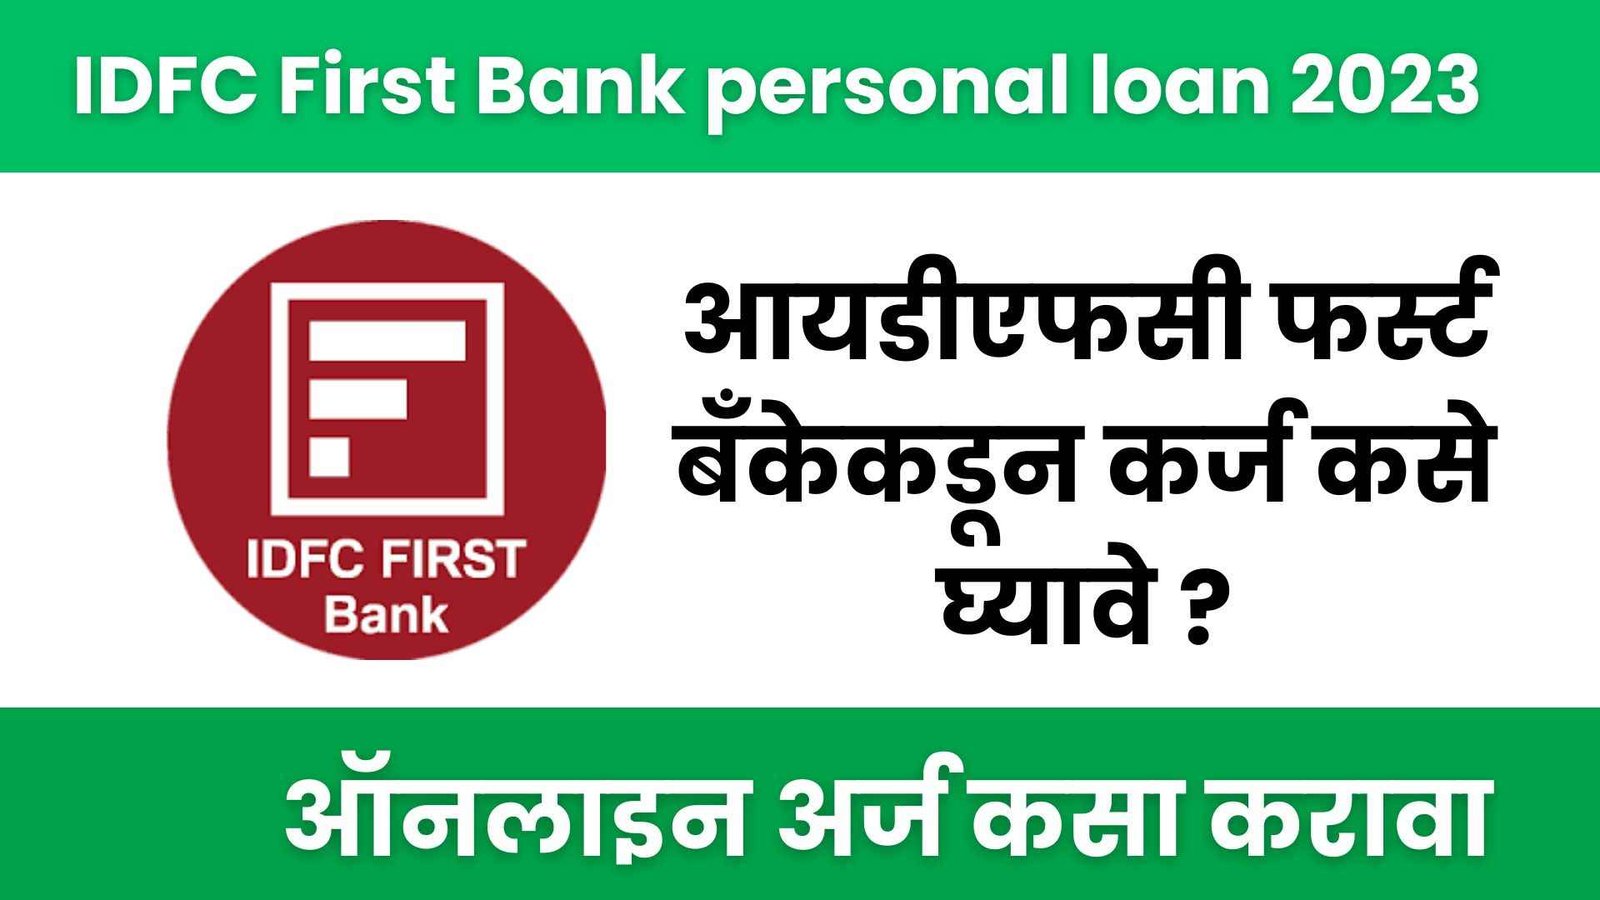 IDFC first Bank personal loan 2023